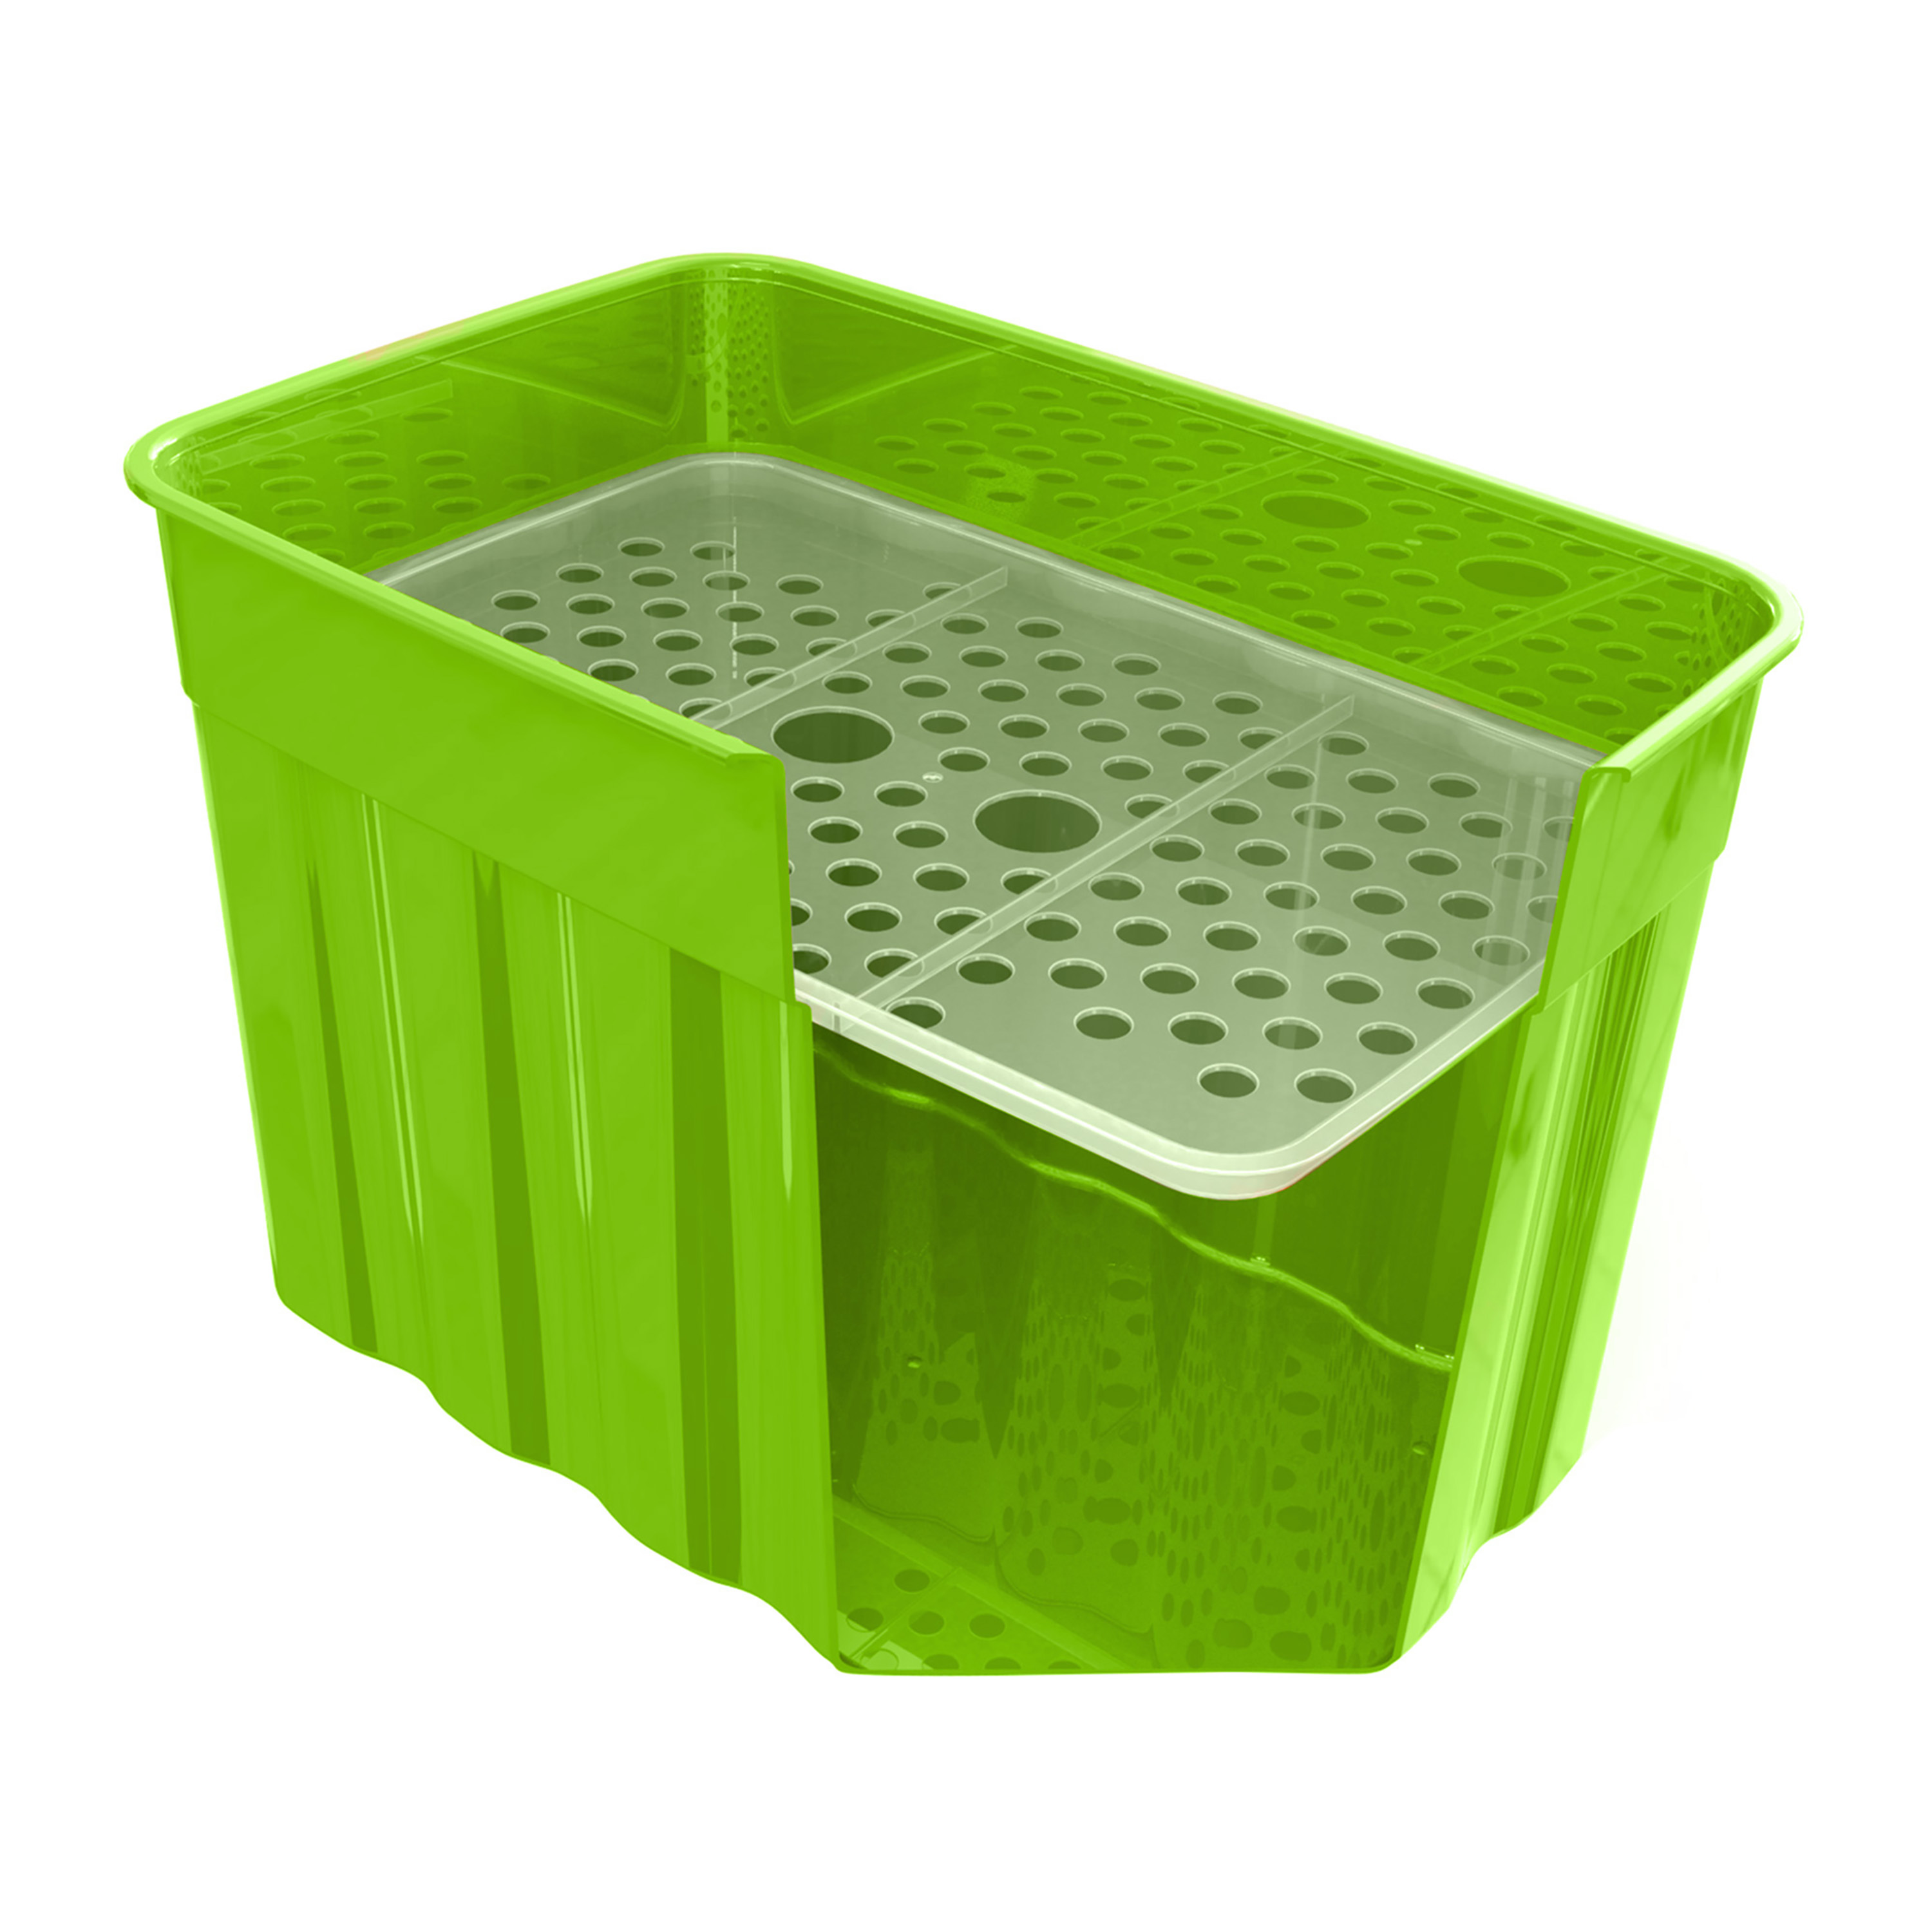 Arctic Zone 30 cans Zipperless Soft Sided Cooler with Hard Liner, Black and Green - image 4 of 11